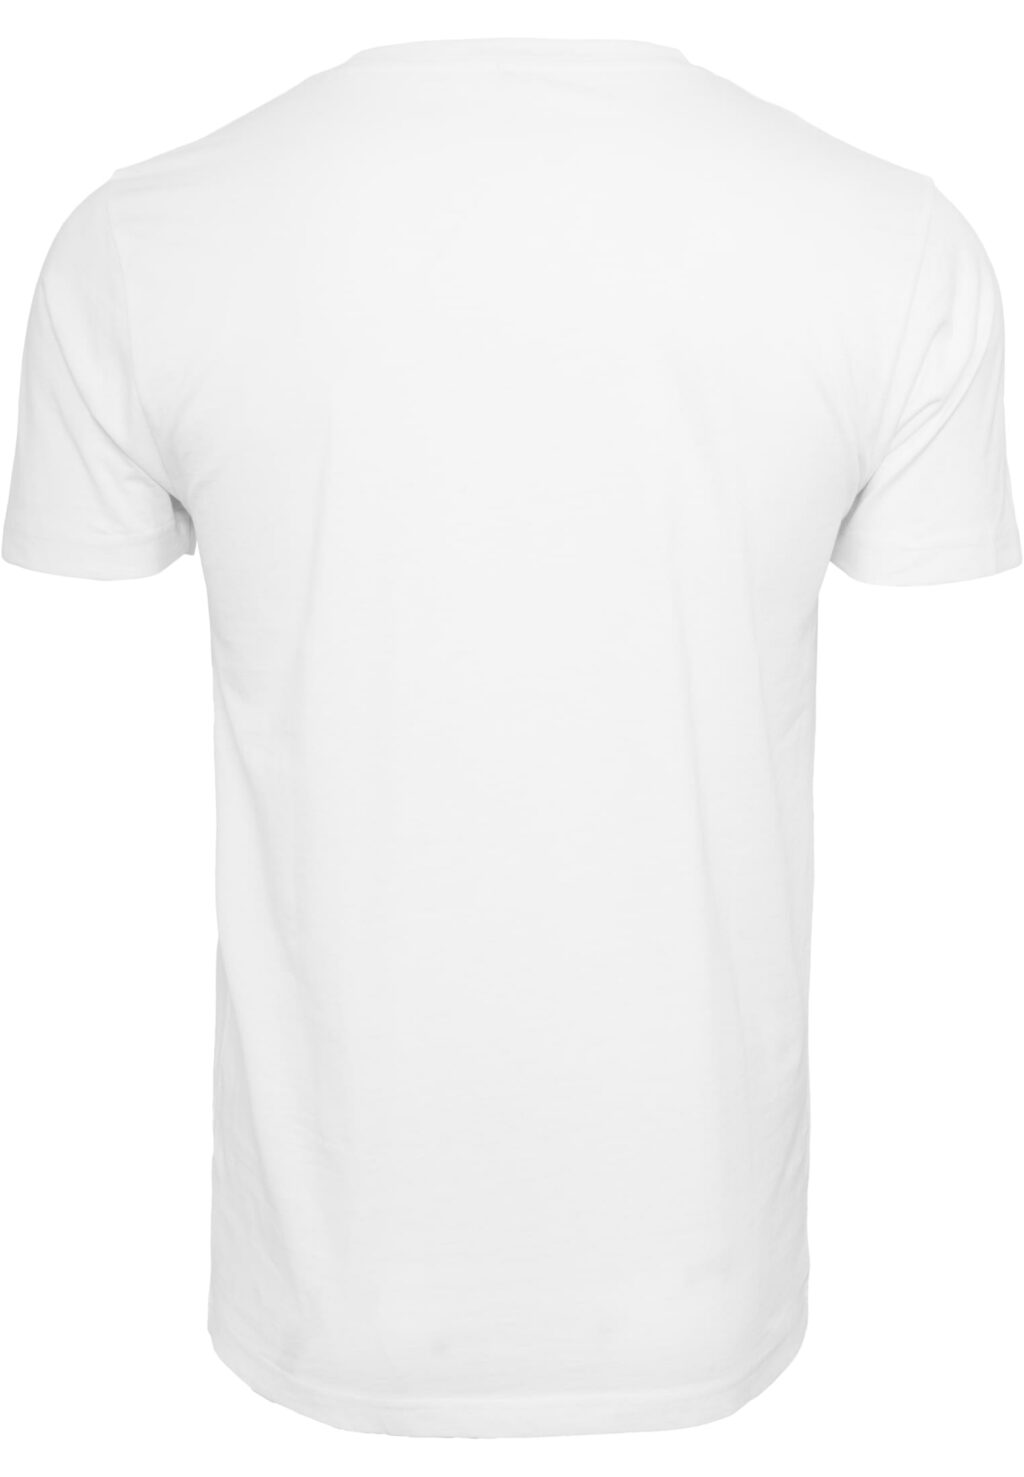 Footballs Coming Home All Weather Sports Tee white MC875